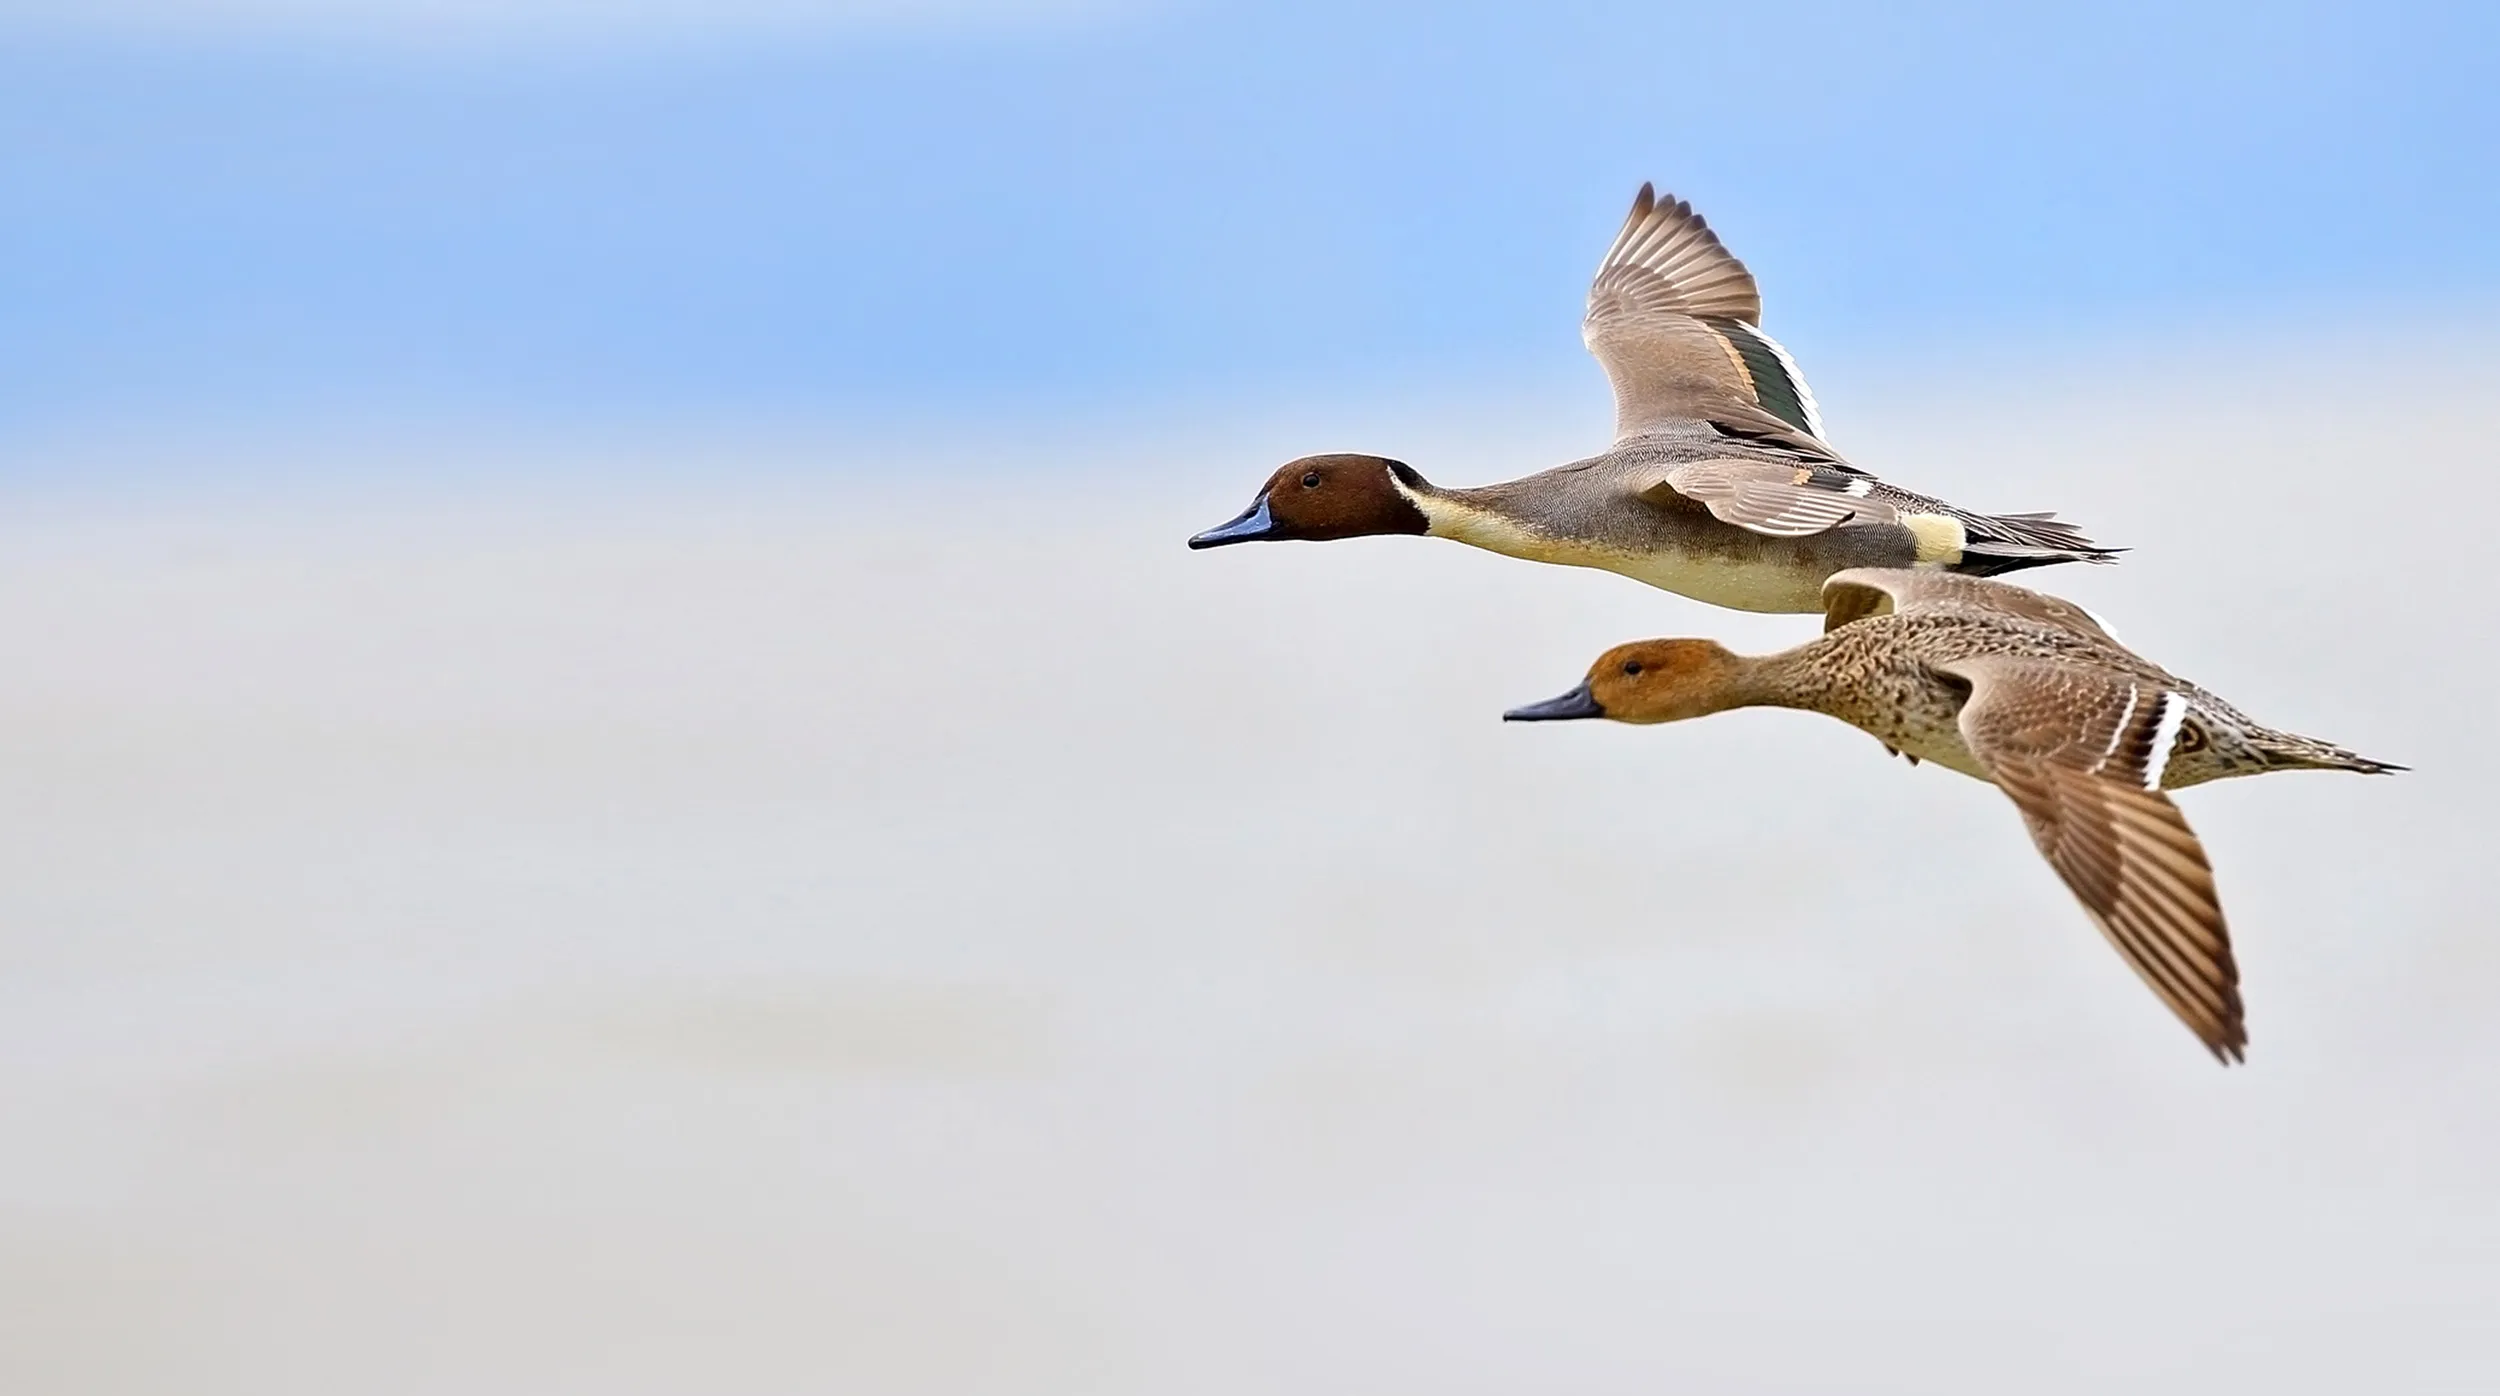 Two Pintail Ducks flying side by side, against a white and blue, blurred background